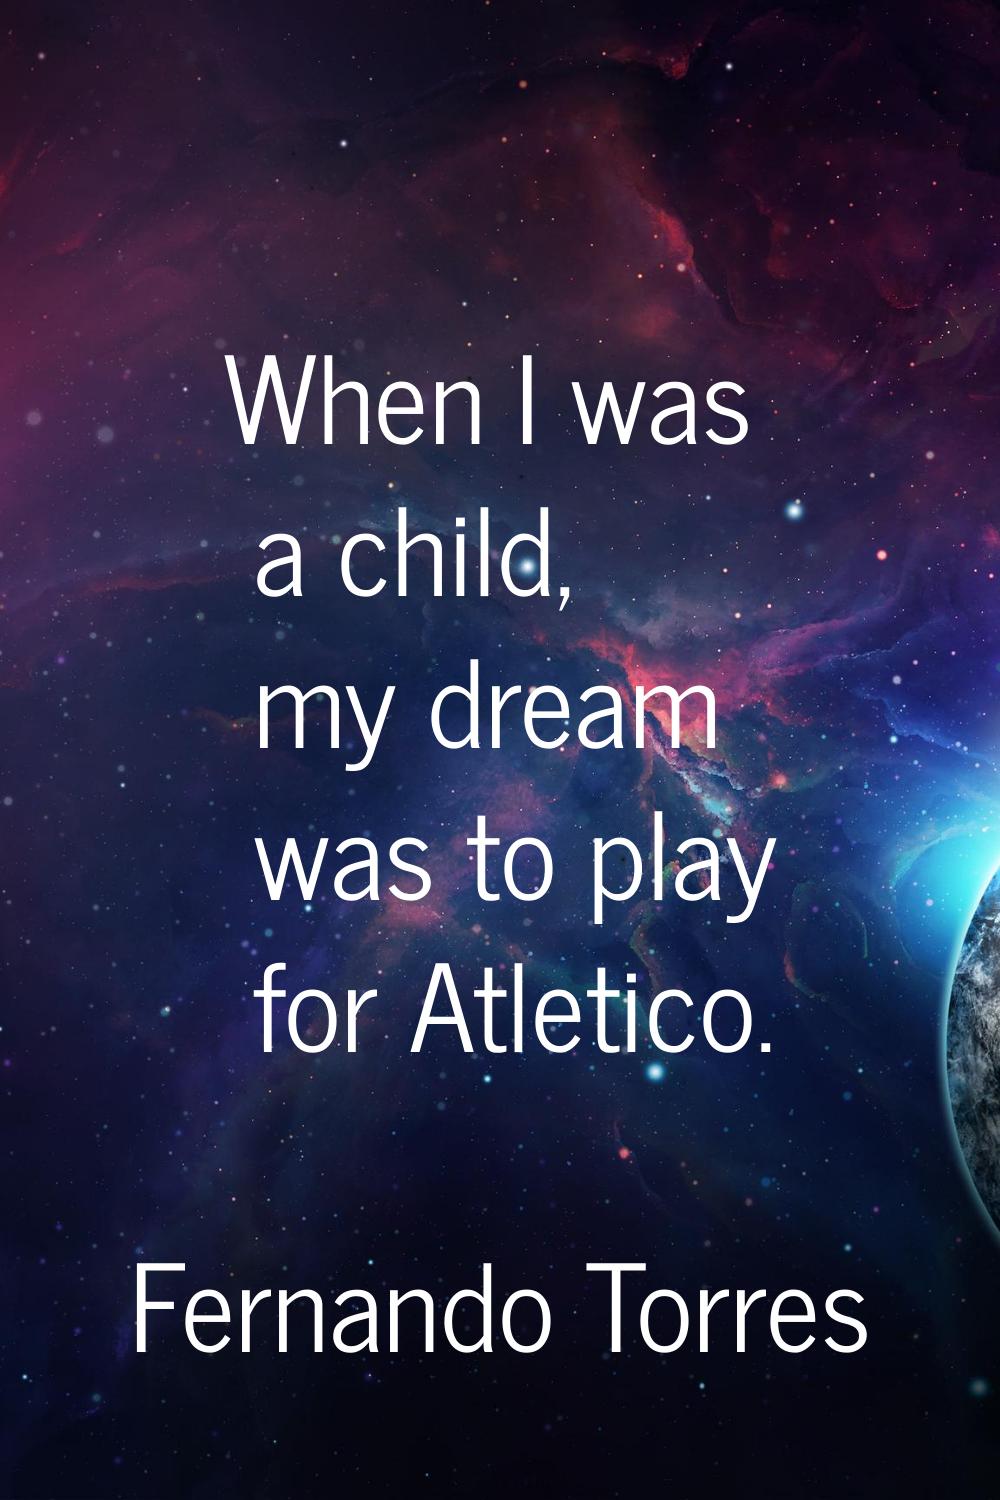 When I was a child, my dream was to play for Atletico.